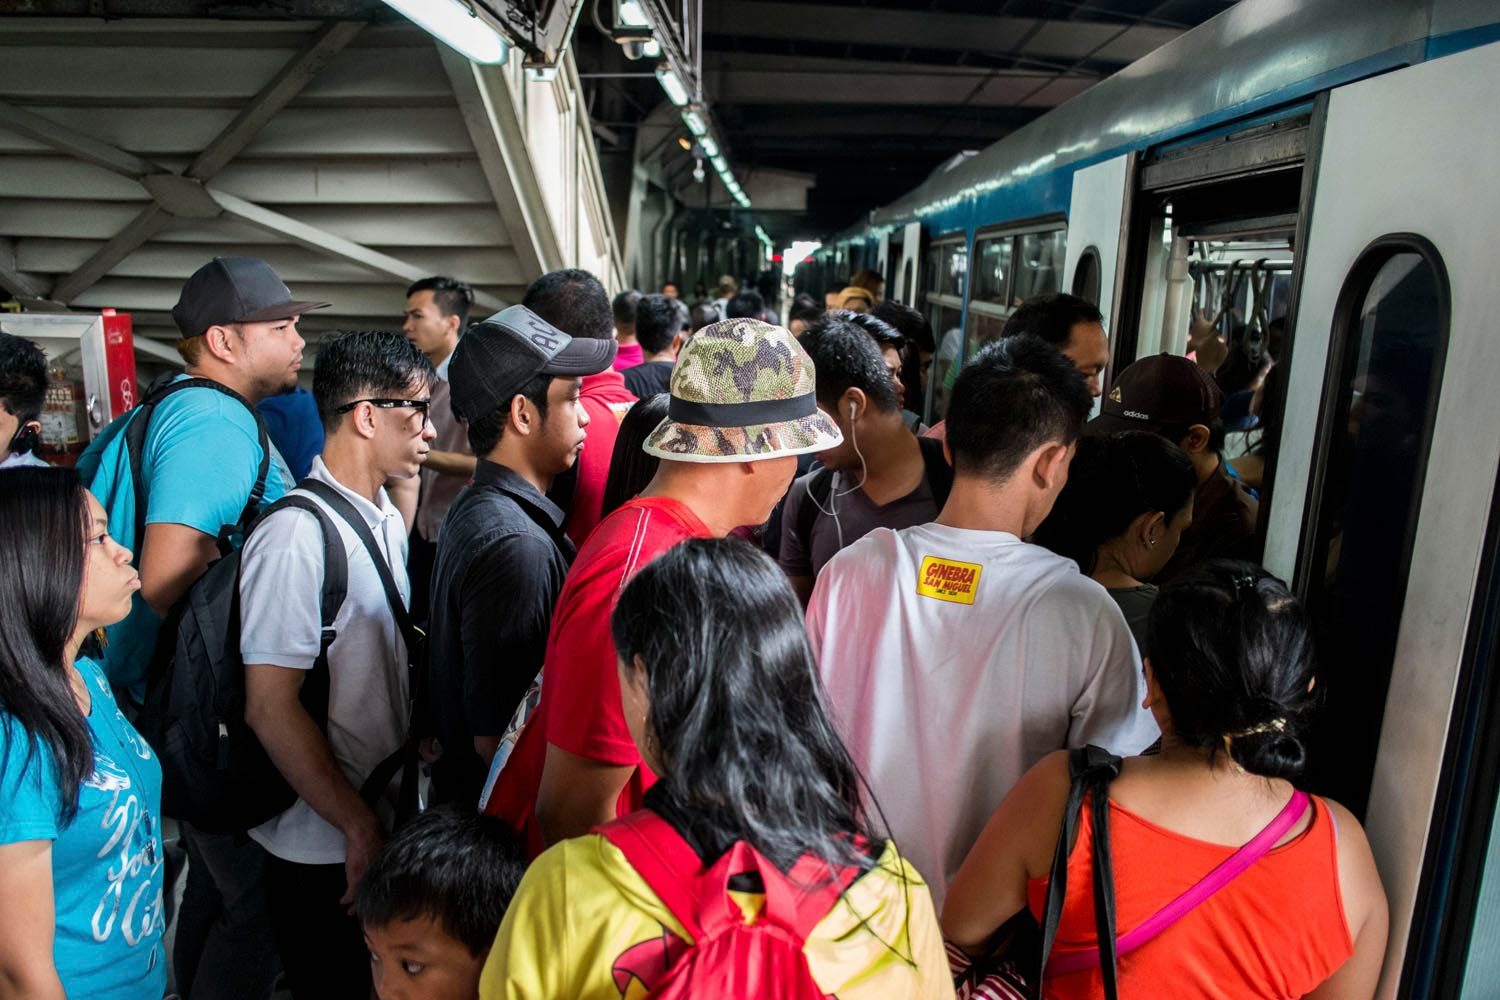 Only 5 MRT trains running; long lines at stations